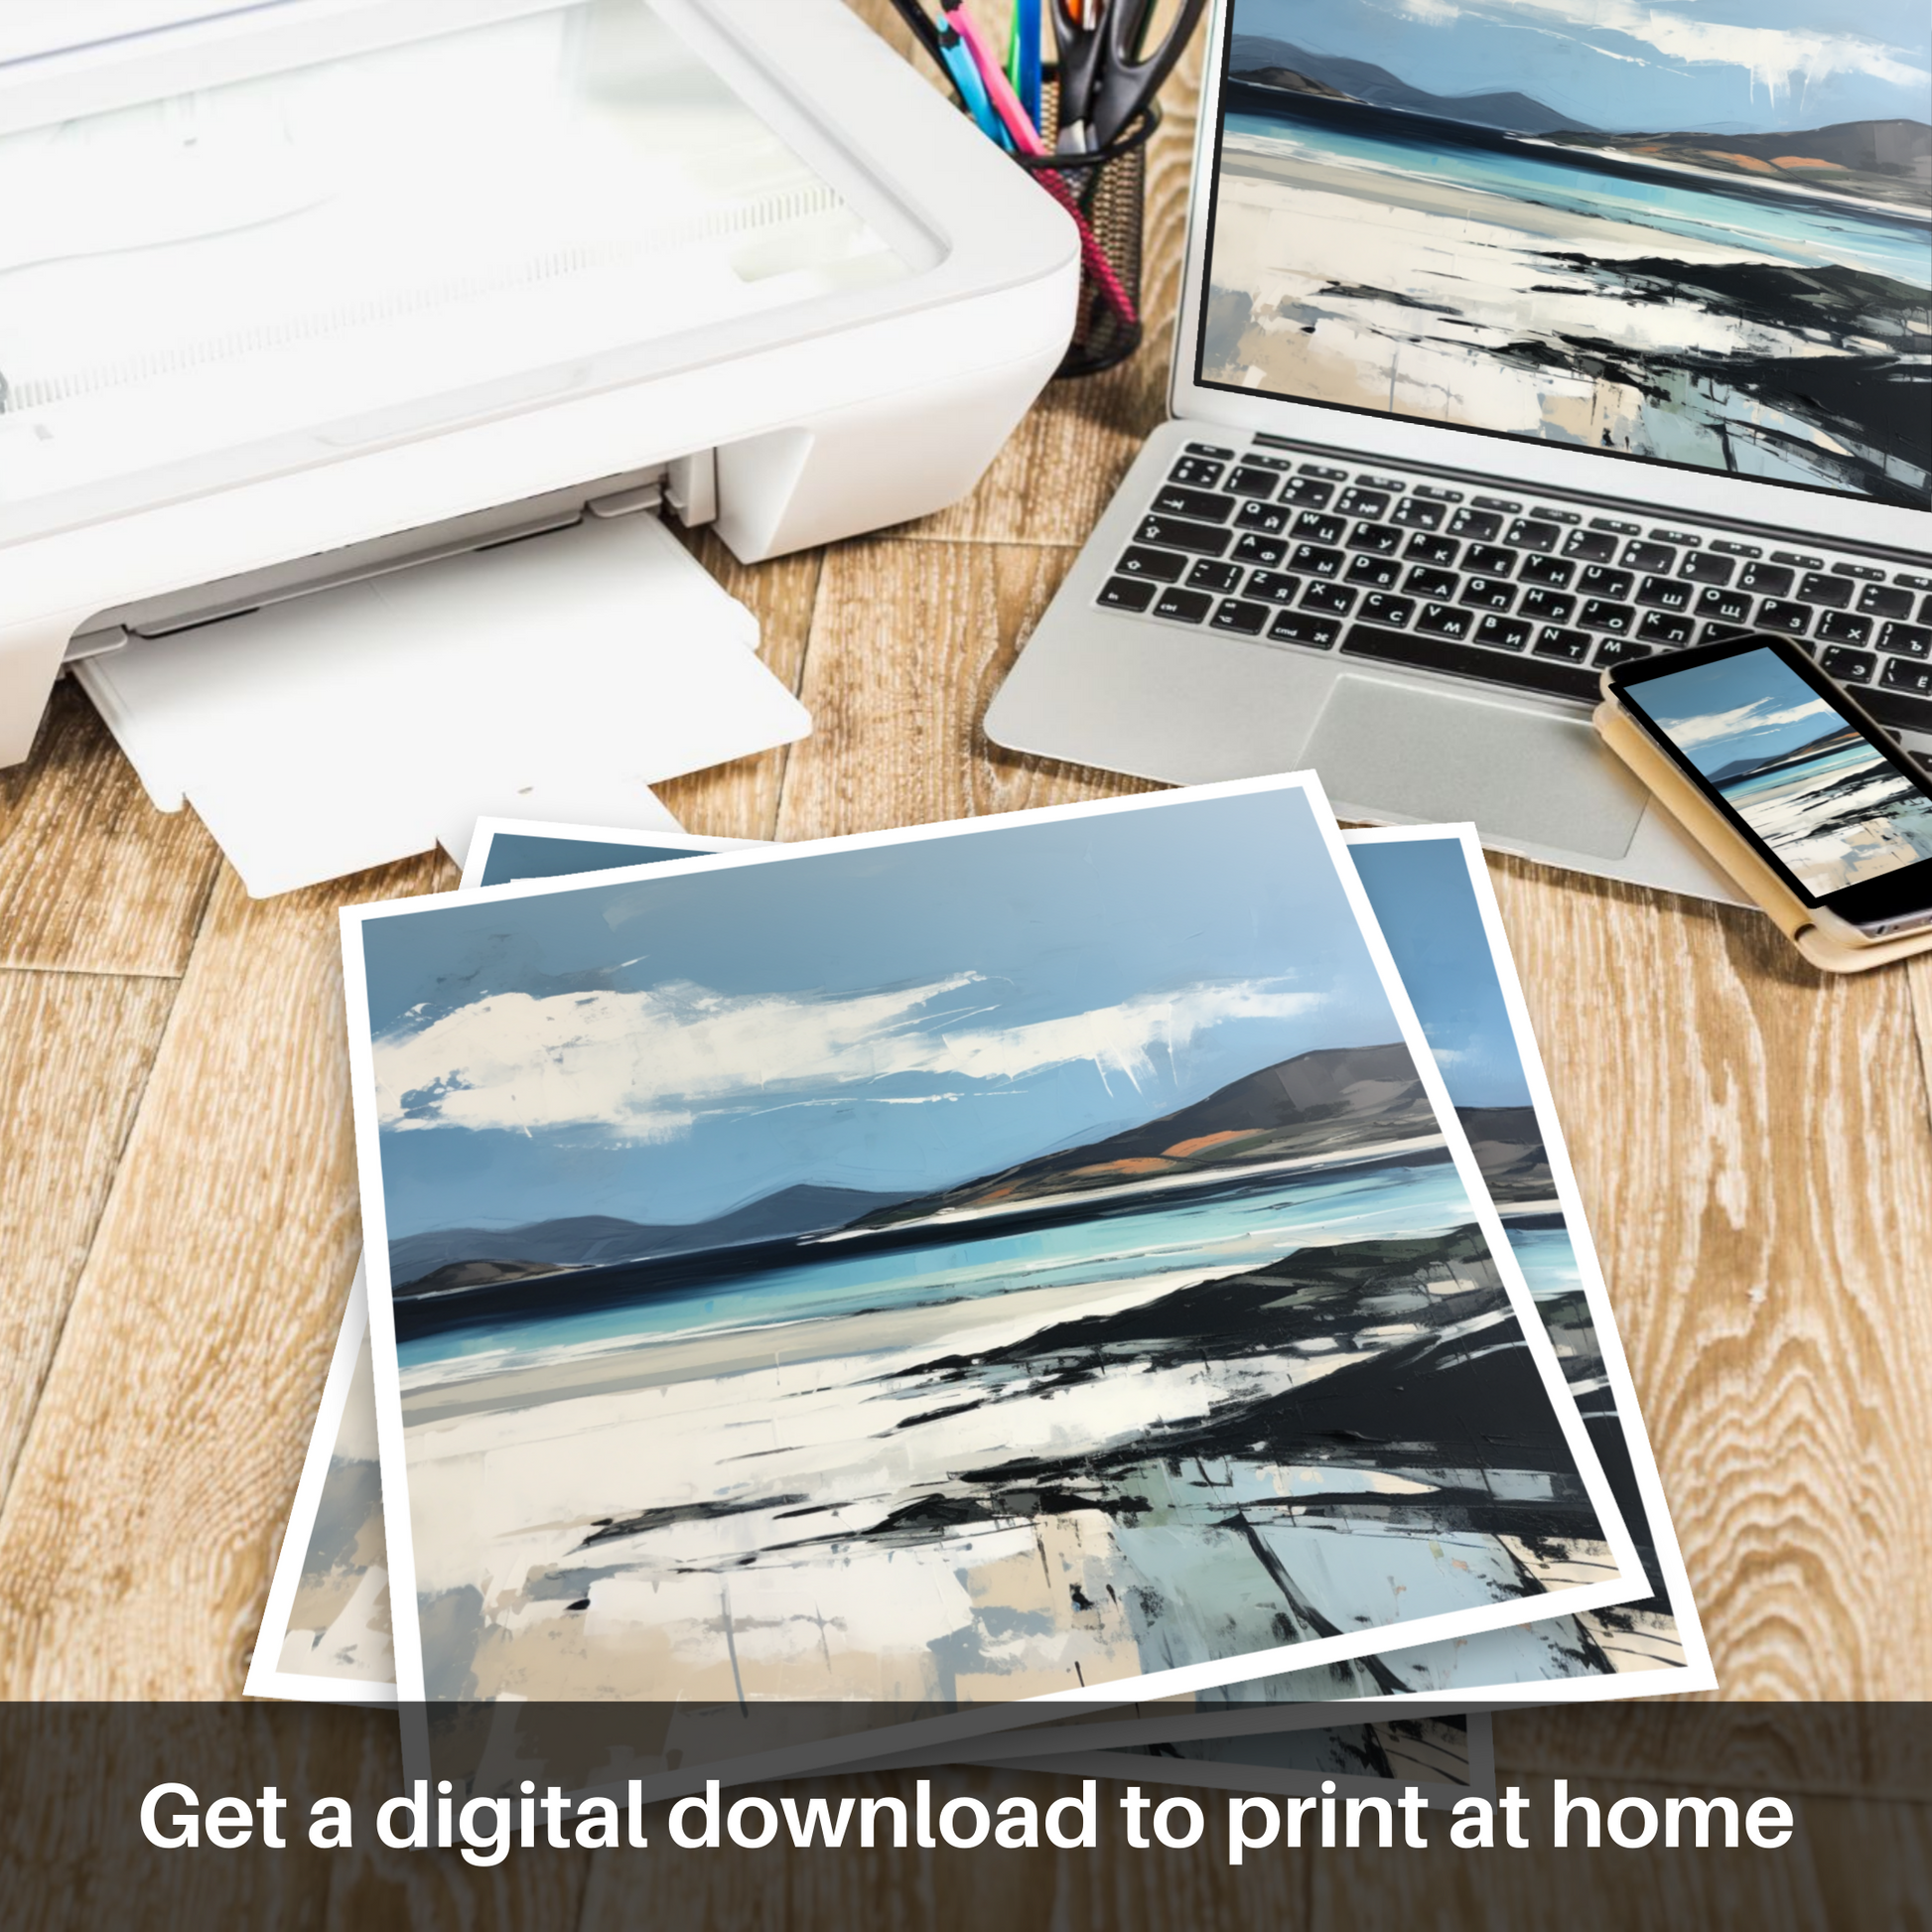 Downloadable and printable picture of Luskentyre Sands on the Isle of Harris